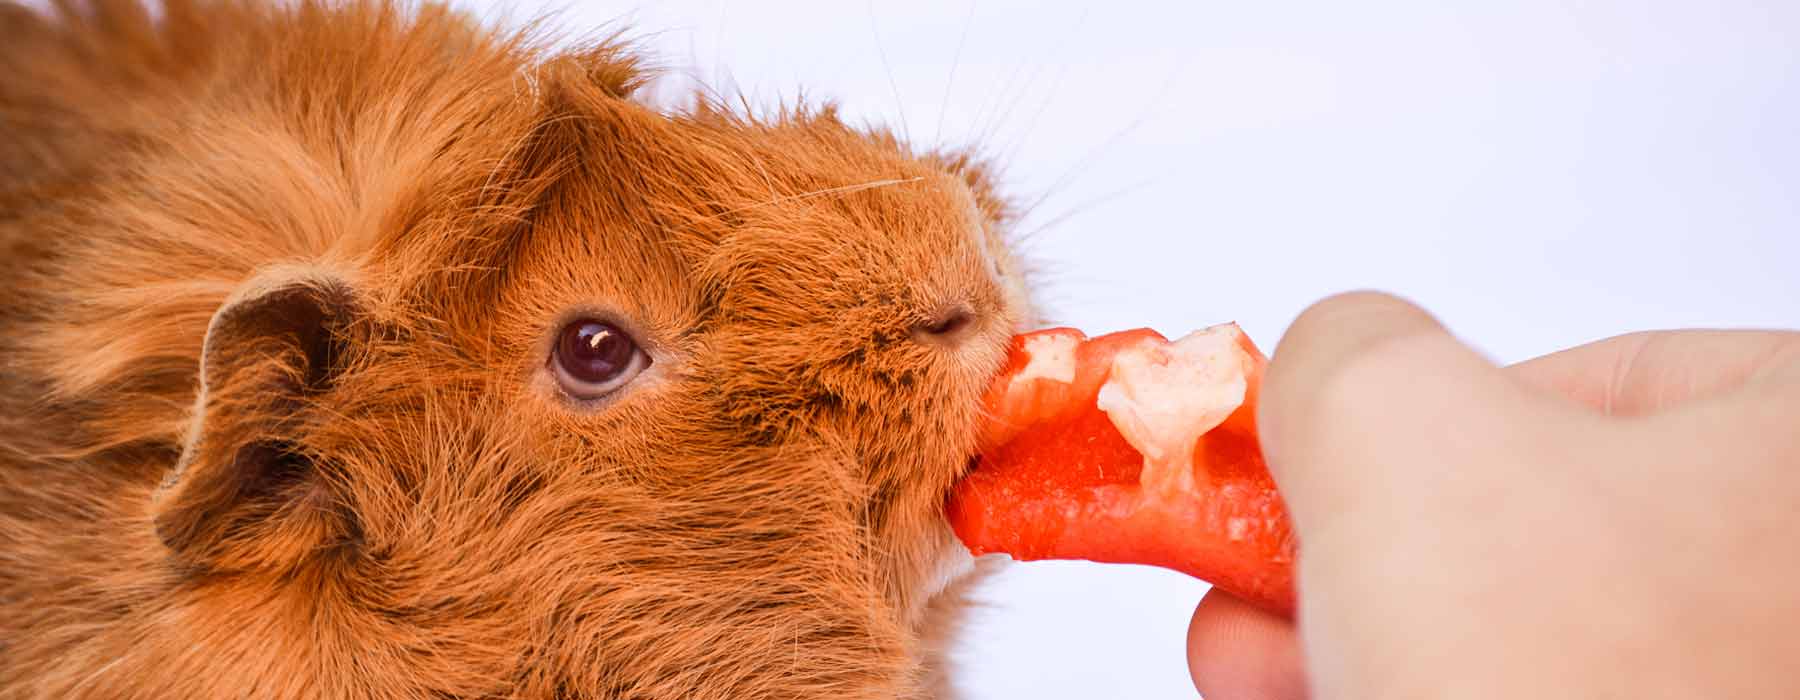 ginger guinea pig eating a piece of sweet red bell pepper